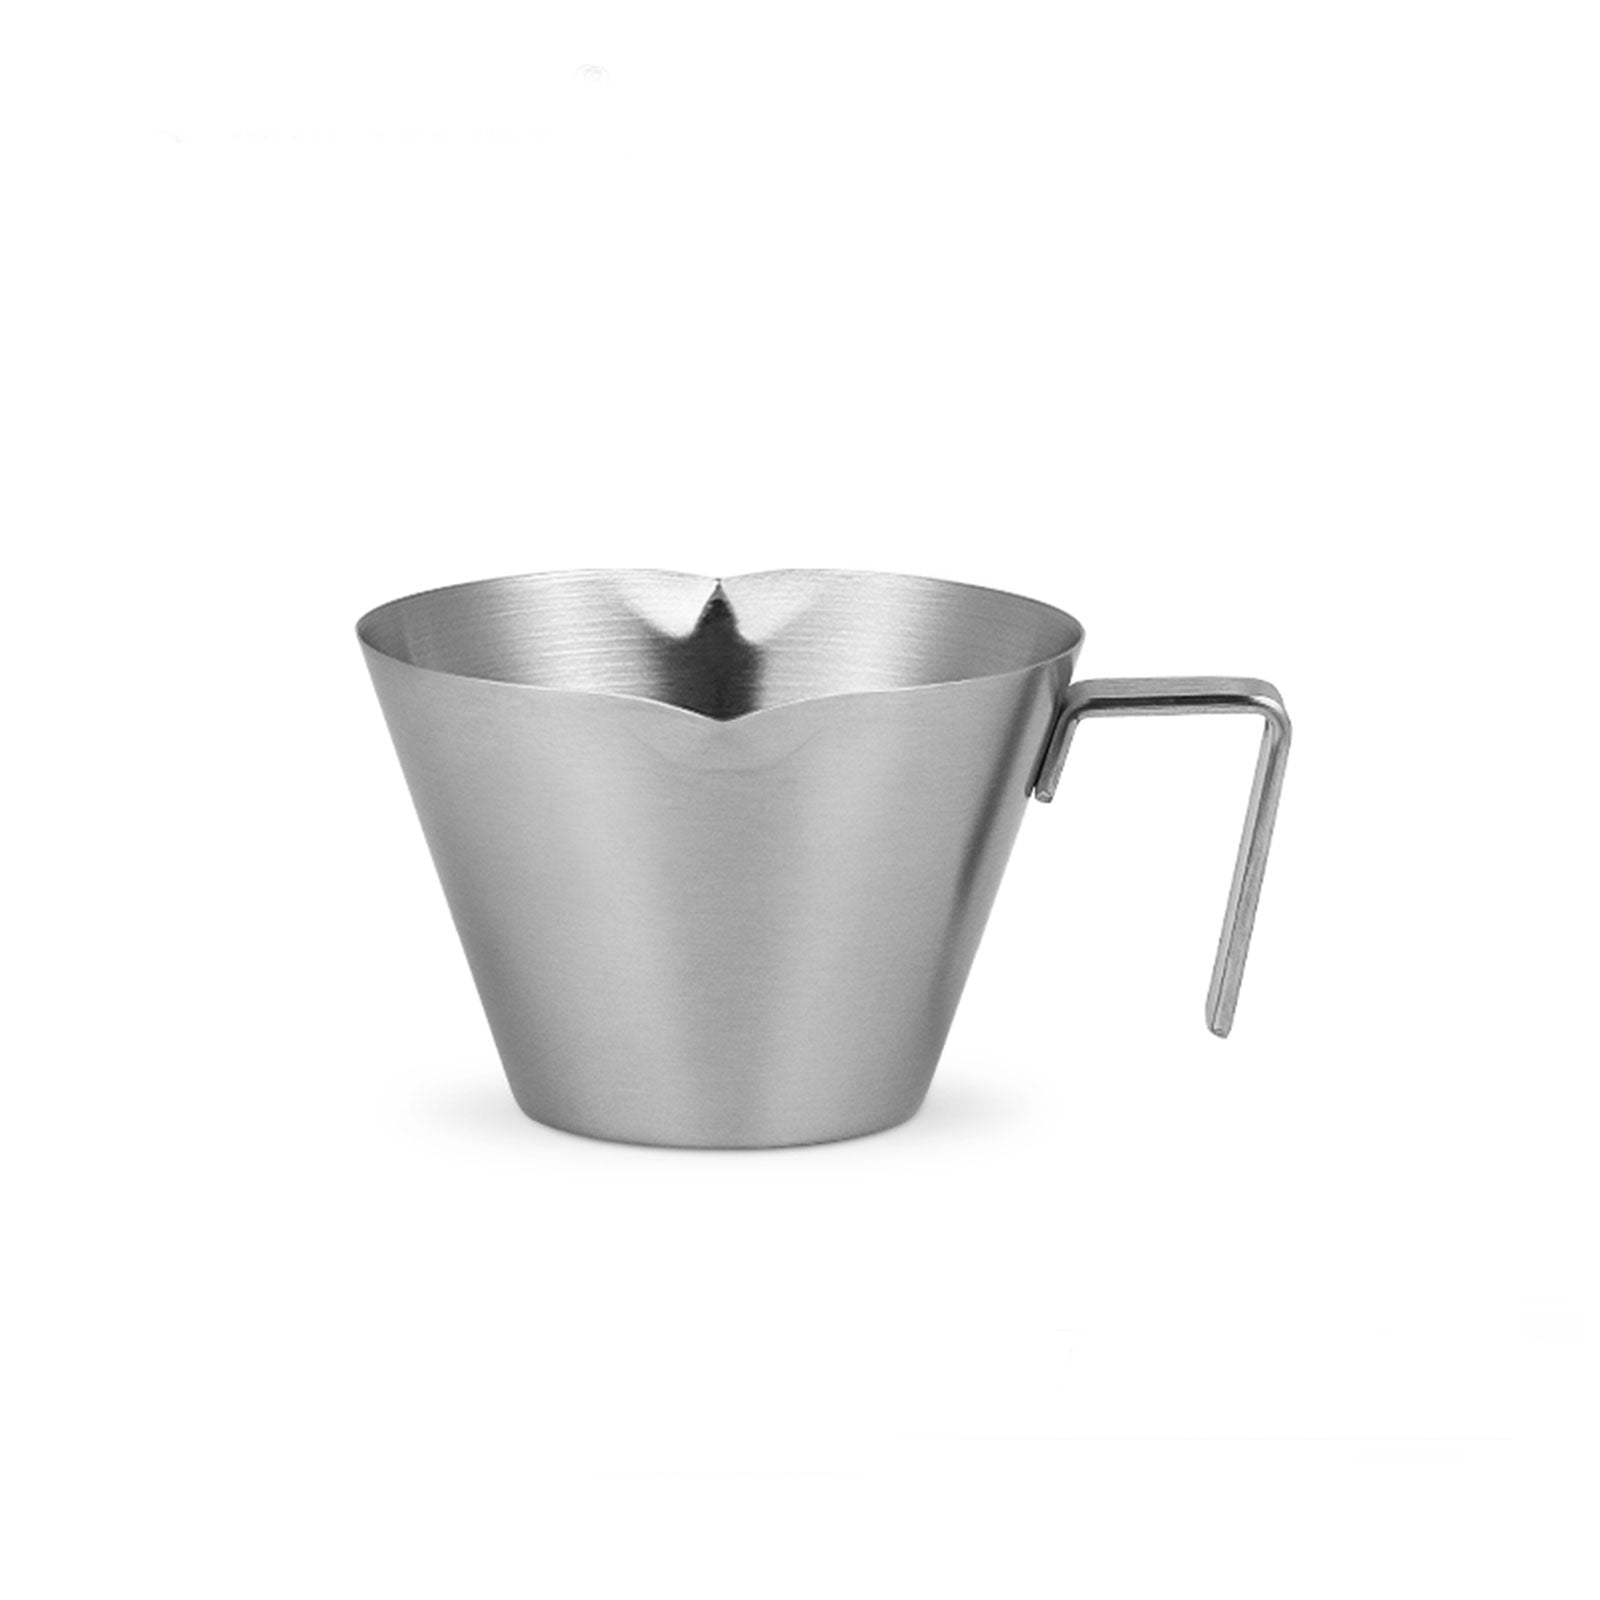 MHW-3BOMBER Stainless Steel Measuring Cup